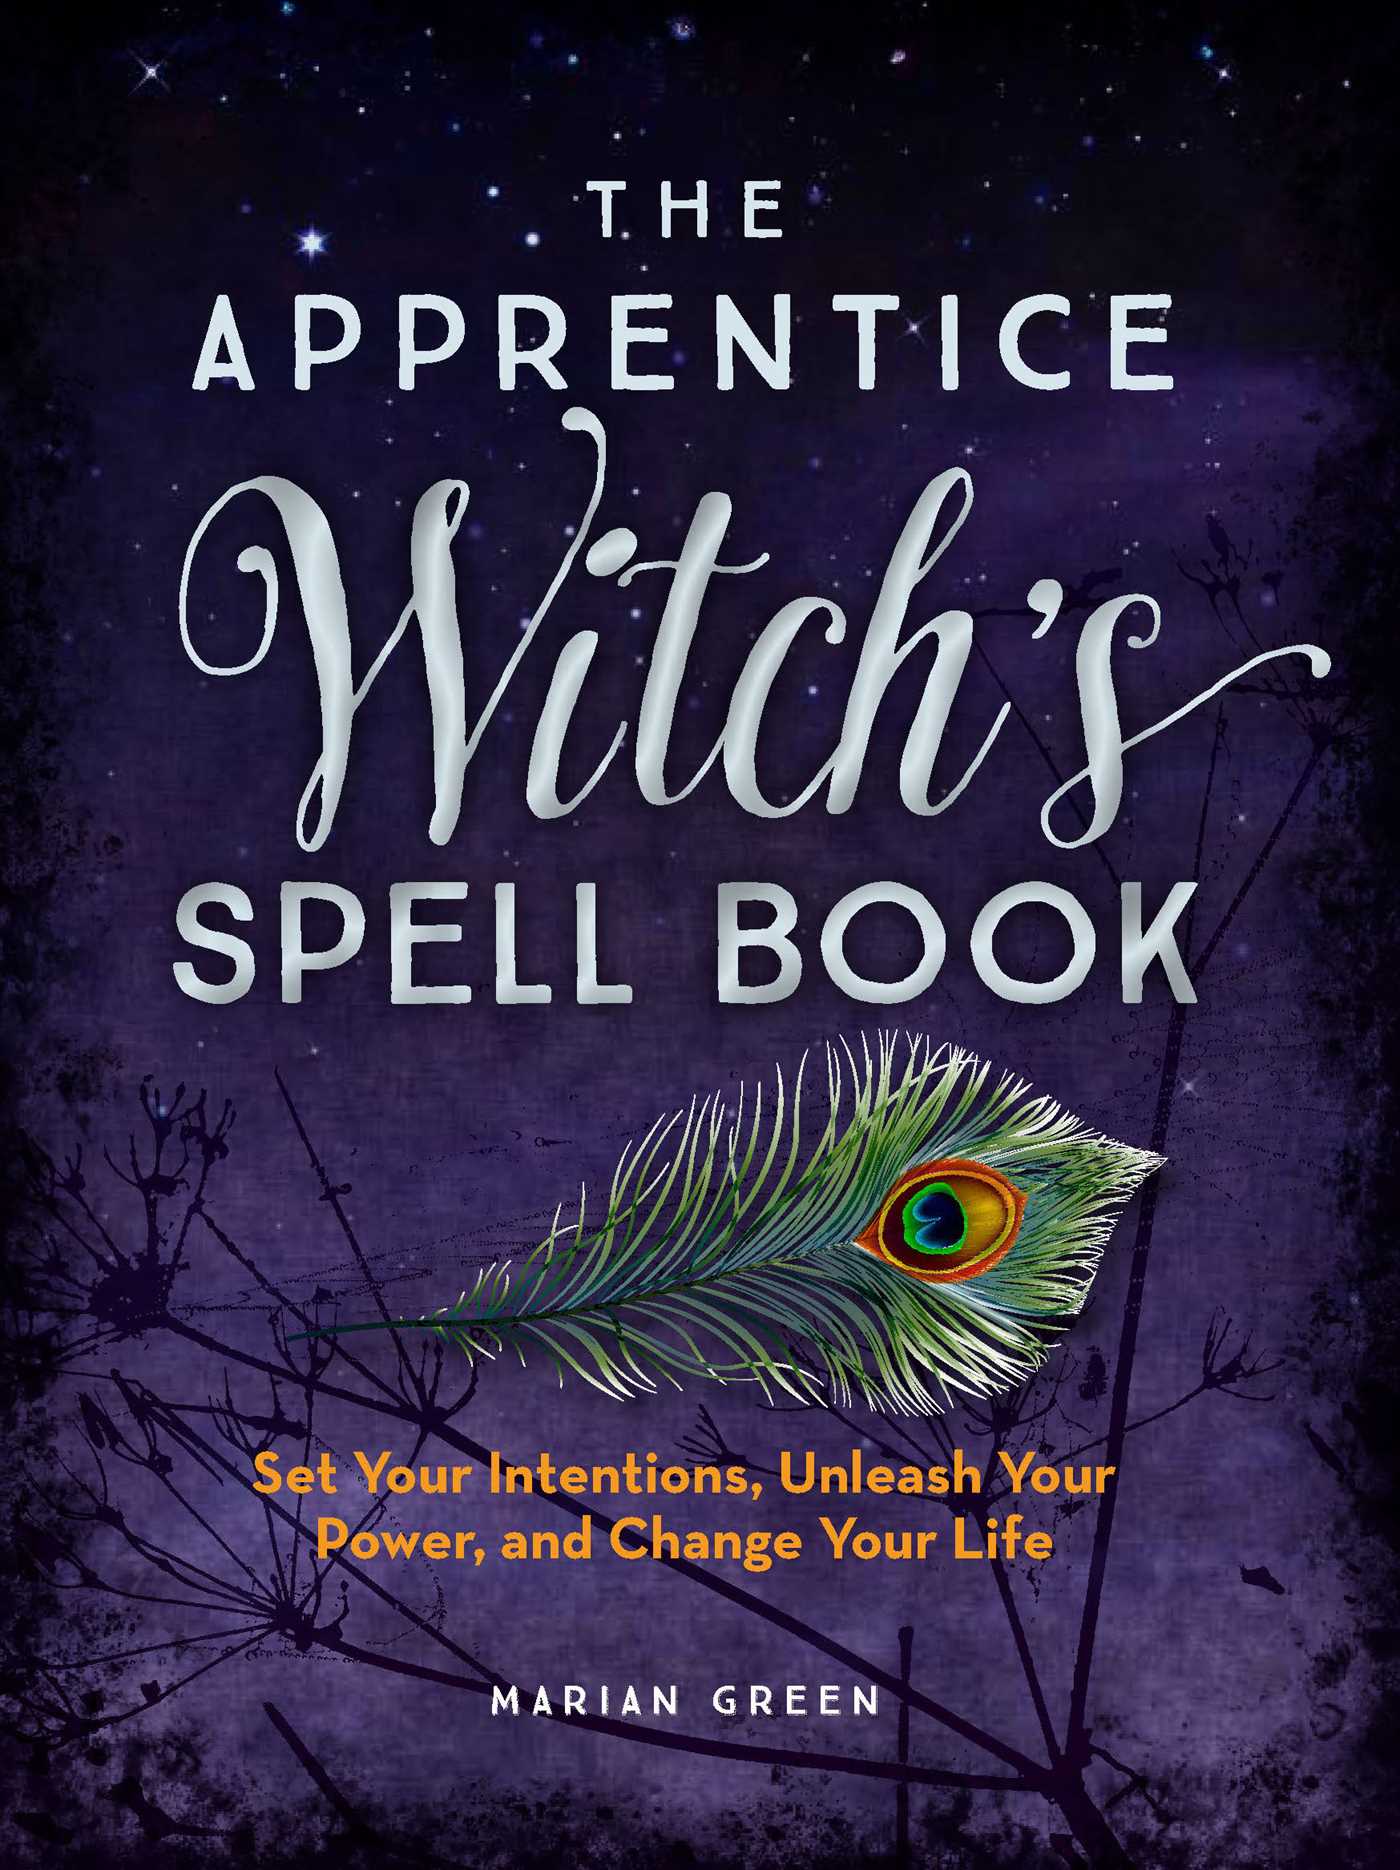 The Apprentice Witch's Spell Book. Book by Marian Green. Official Publisher Page. Simon & Schuster